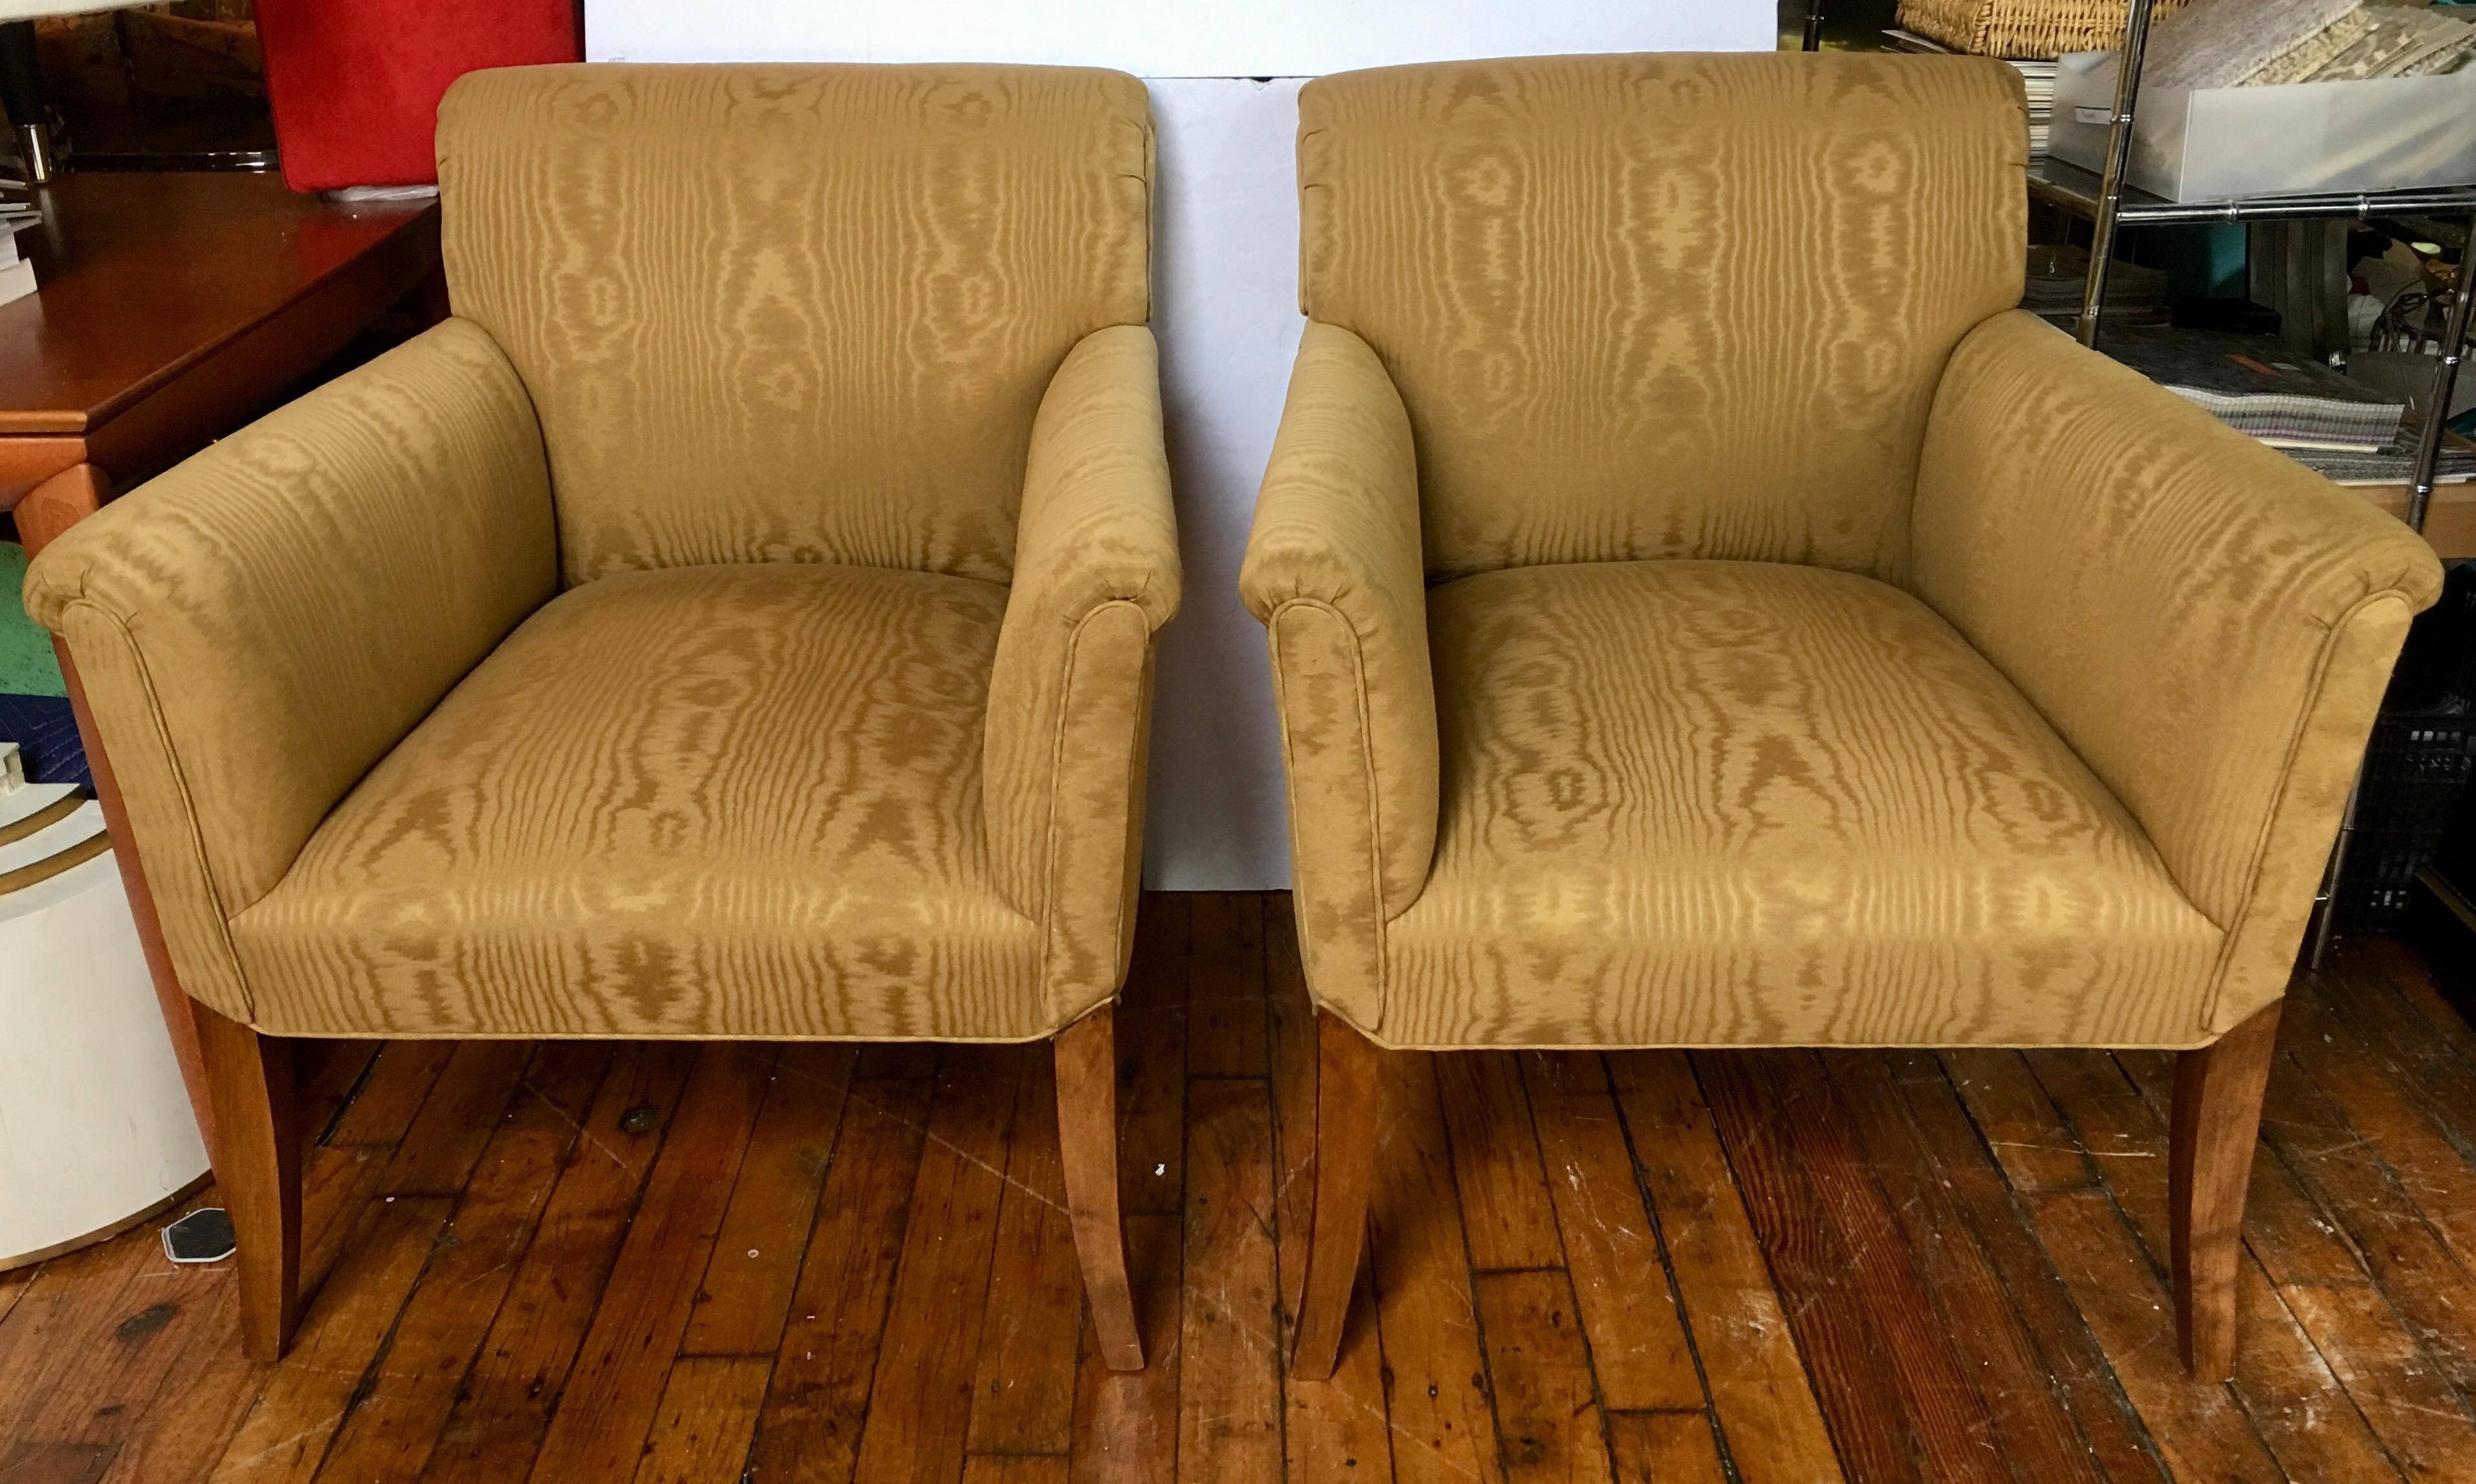 Perfectly proportioned pair of classic gold moire upholstered tight-back arm accent chairs featuring gently flared arms and legs. These generously sized pair of lounge chairs have subtle rolled arms and backs and beautifully curved walnut wood legs.